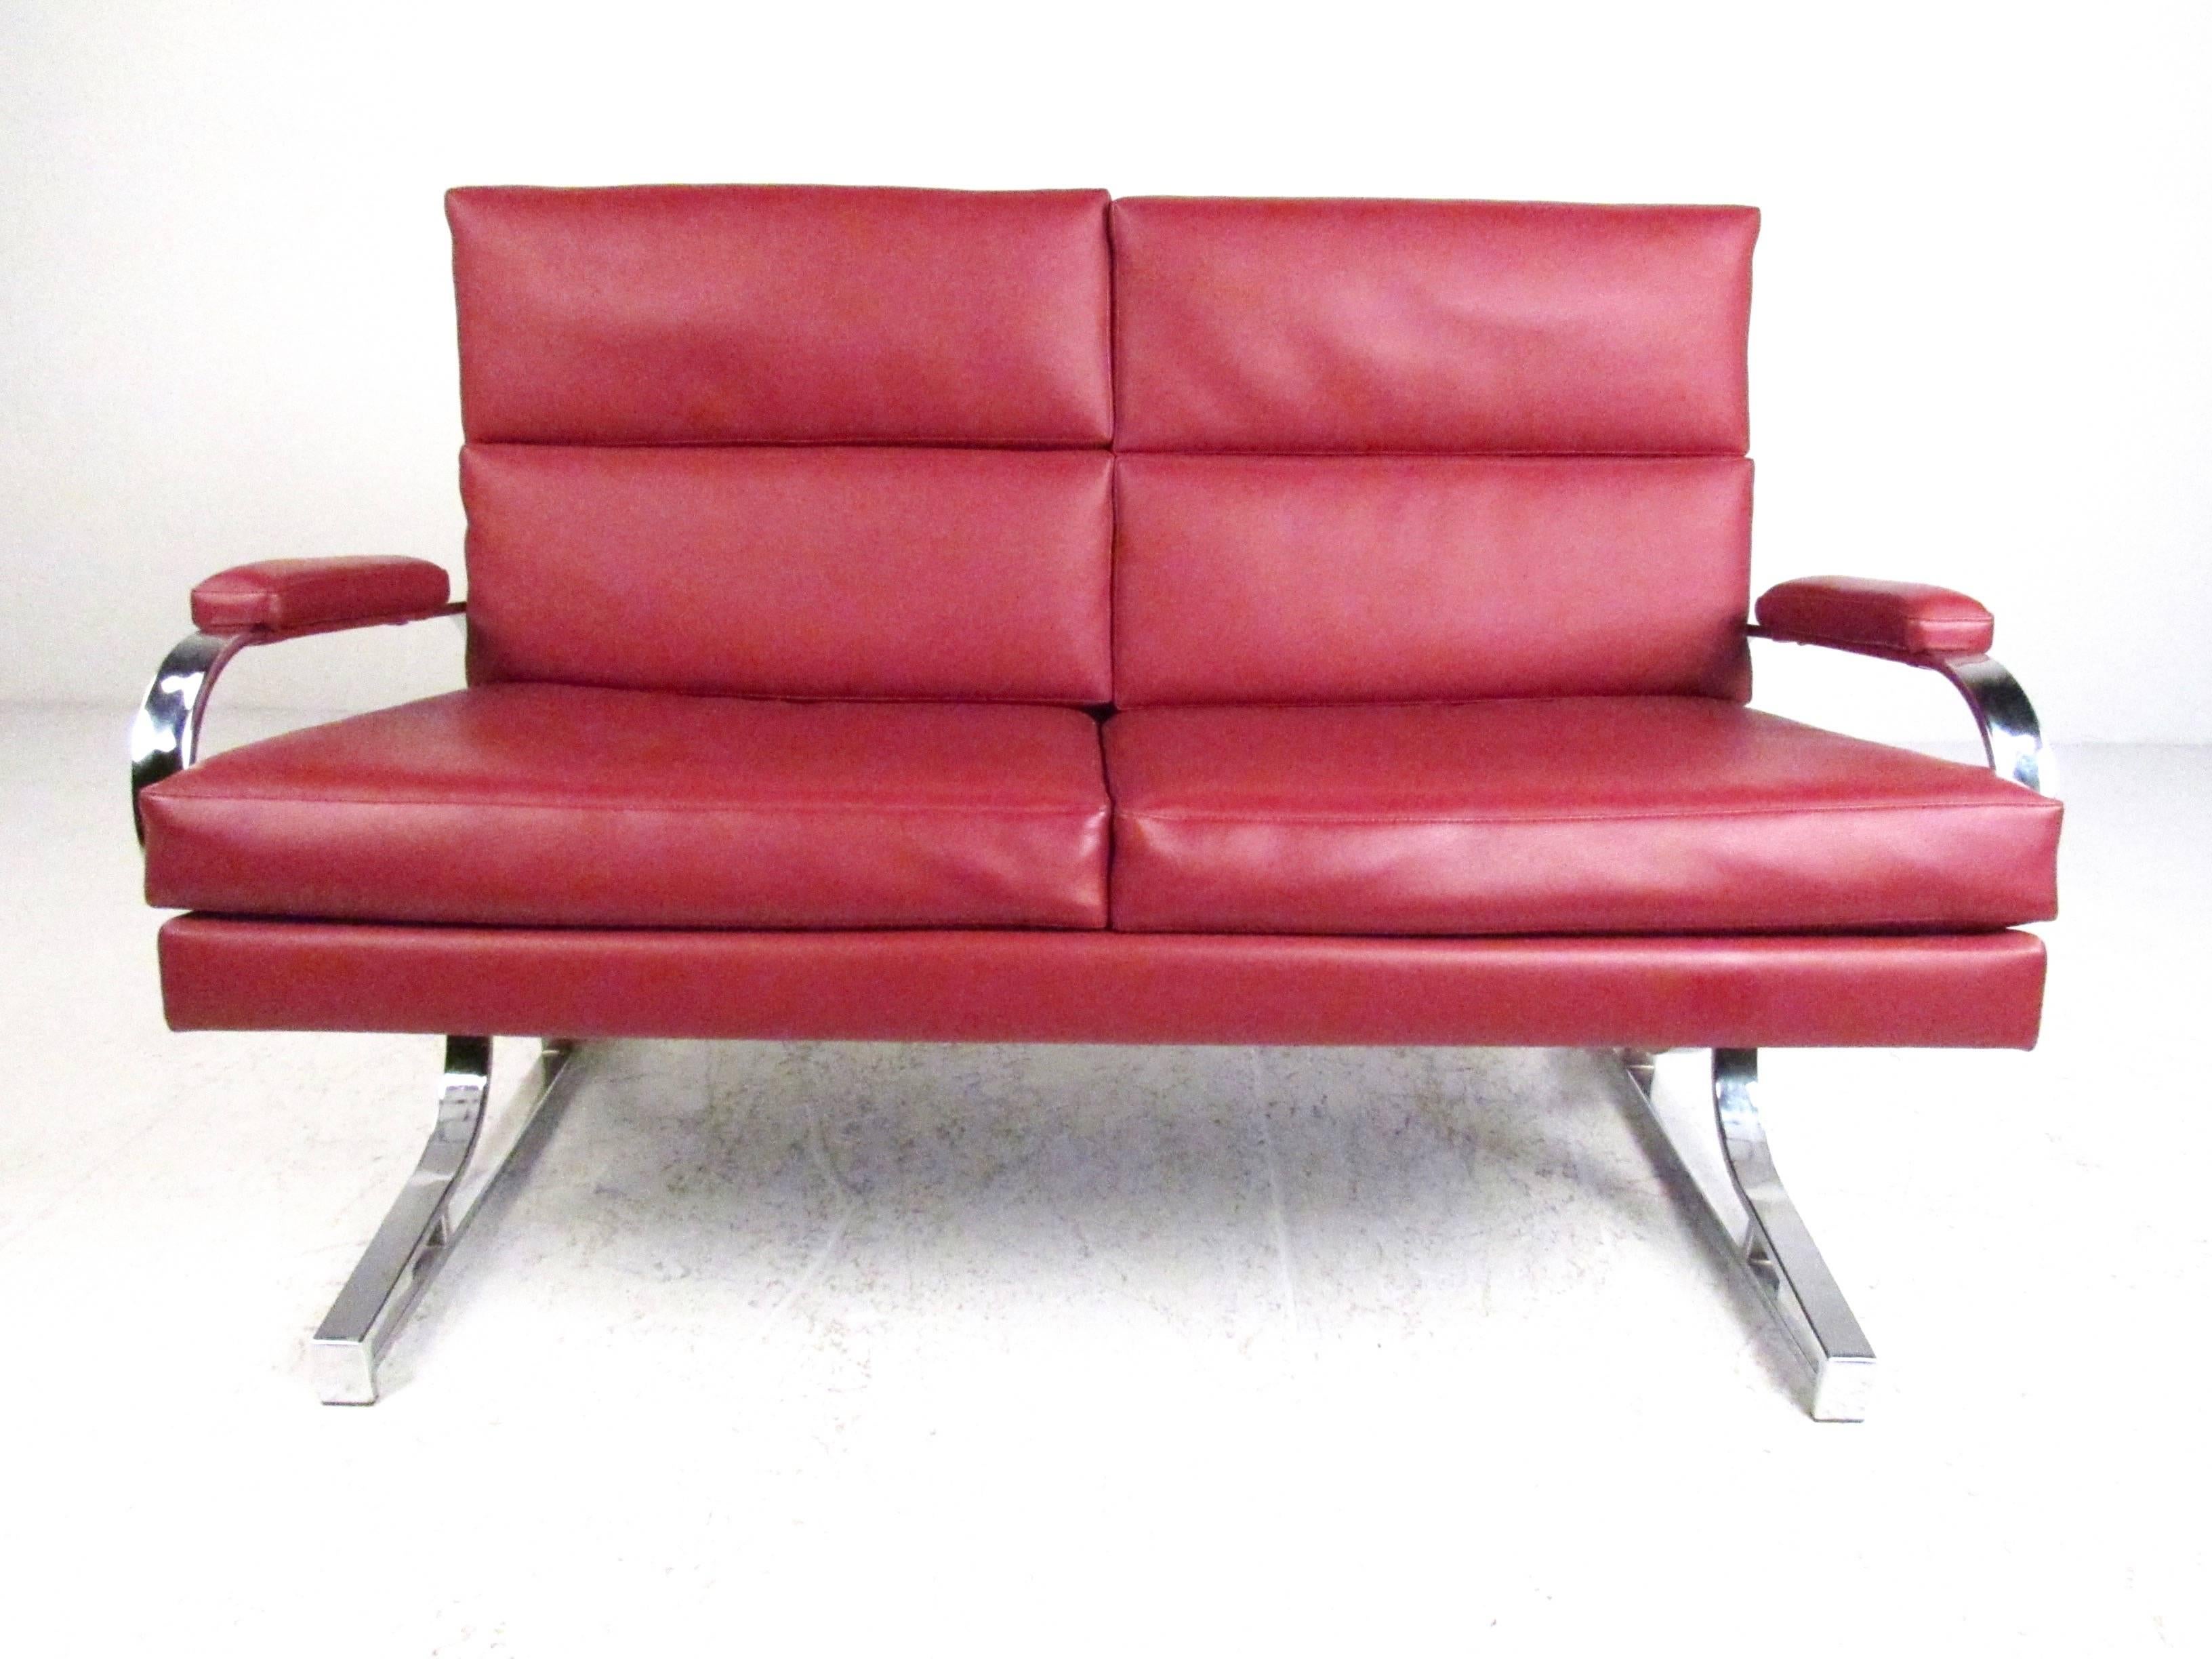 This unique loveseat features heavy chrome frame, plush vinyl upholstery, and a stylish modern design. The perfect mix of style and comfort, this two-seat sofa is perfect for home or business seating. Please confirm item location (NY or NJ).